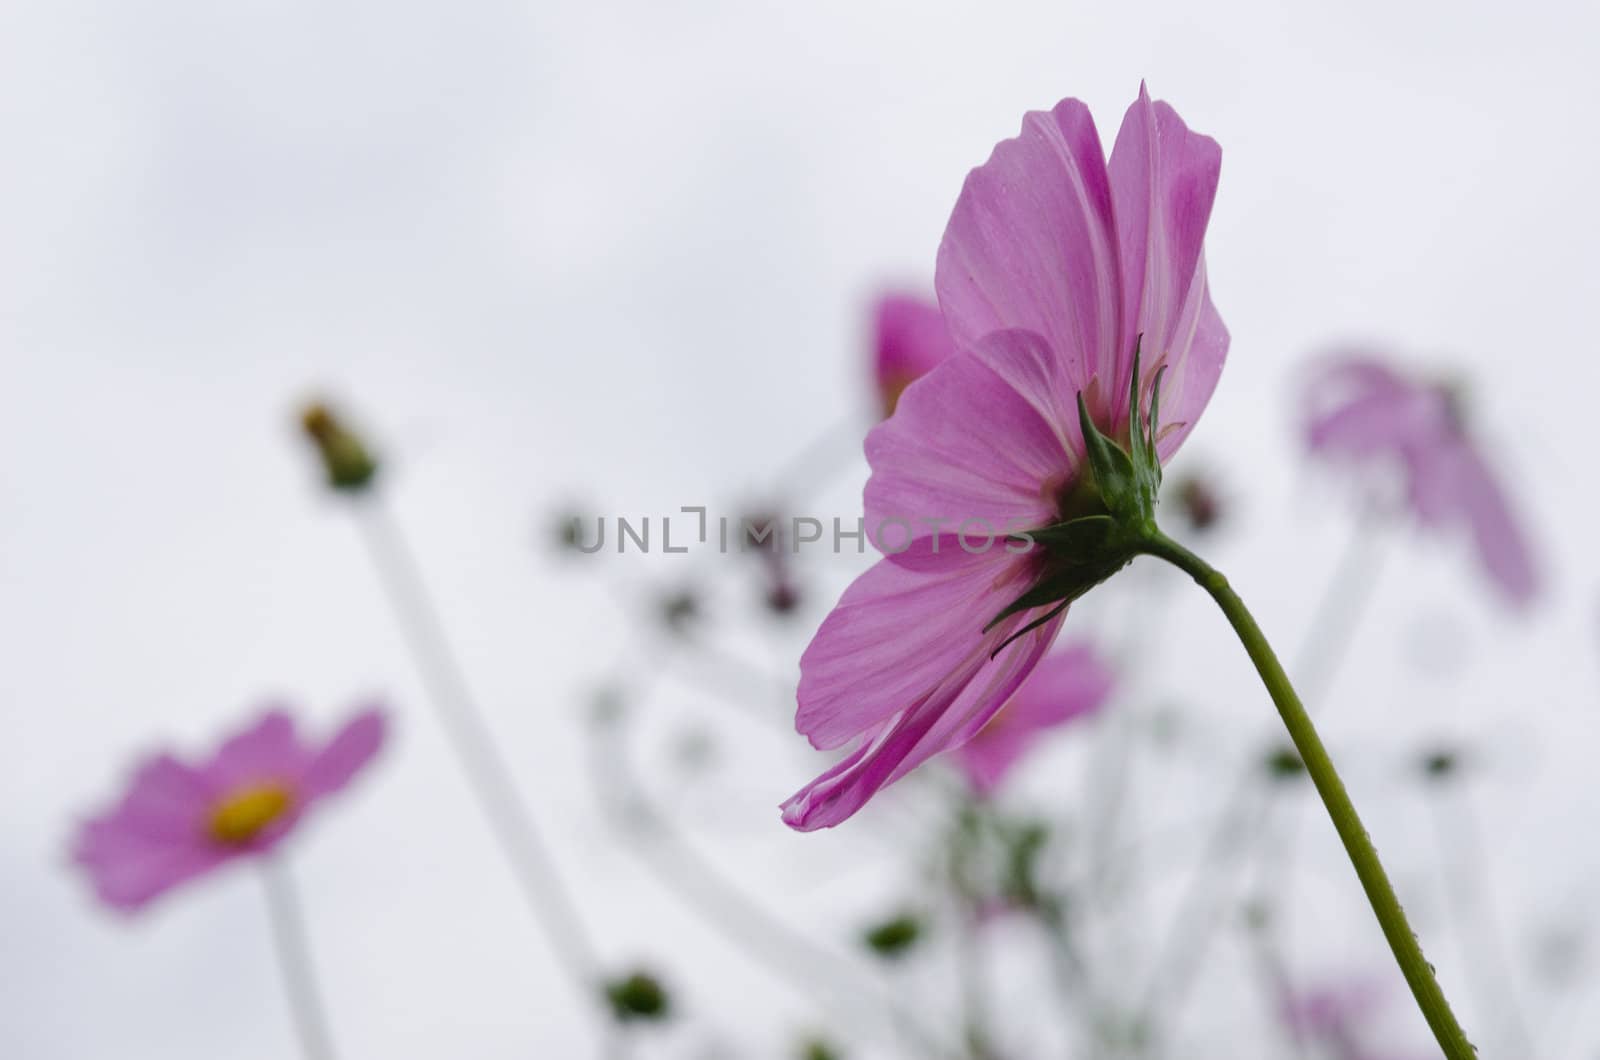 Pink cosmos flowers, Cosmos bipinnatus, in backlight on a rainy day in autumn